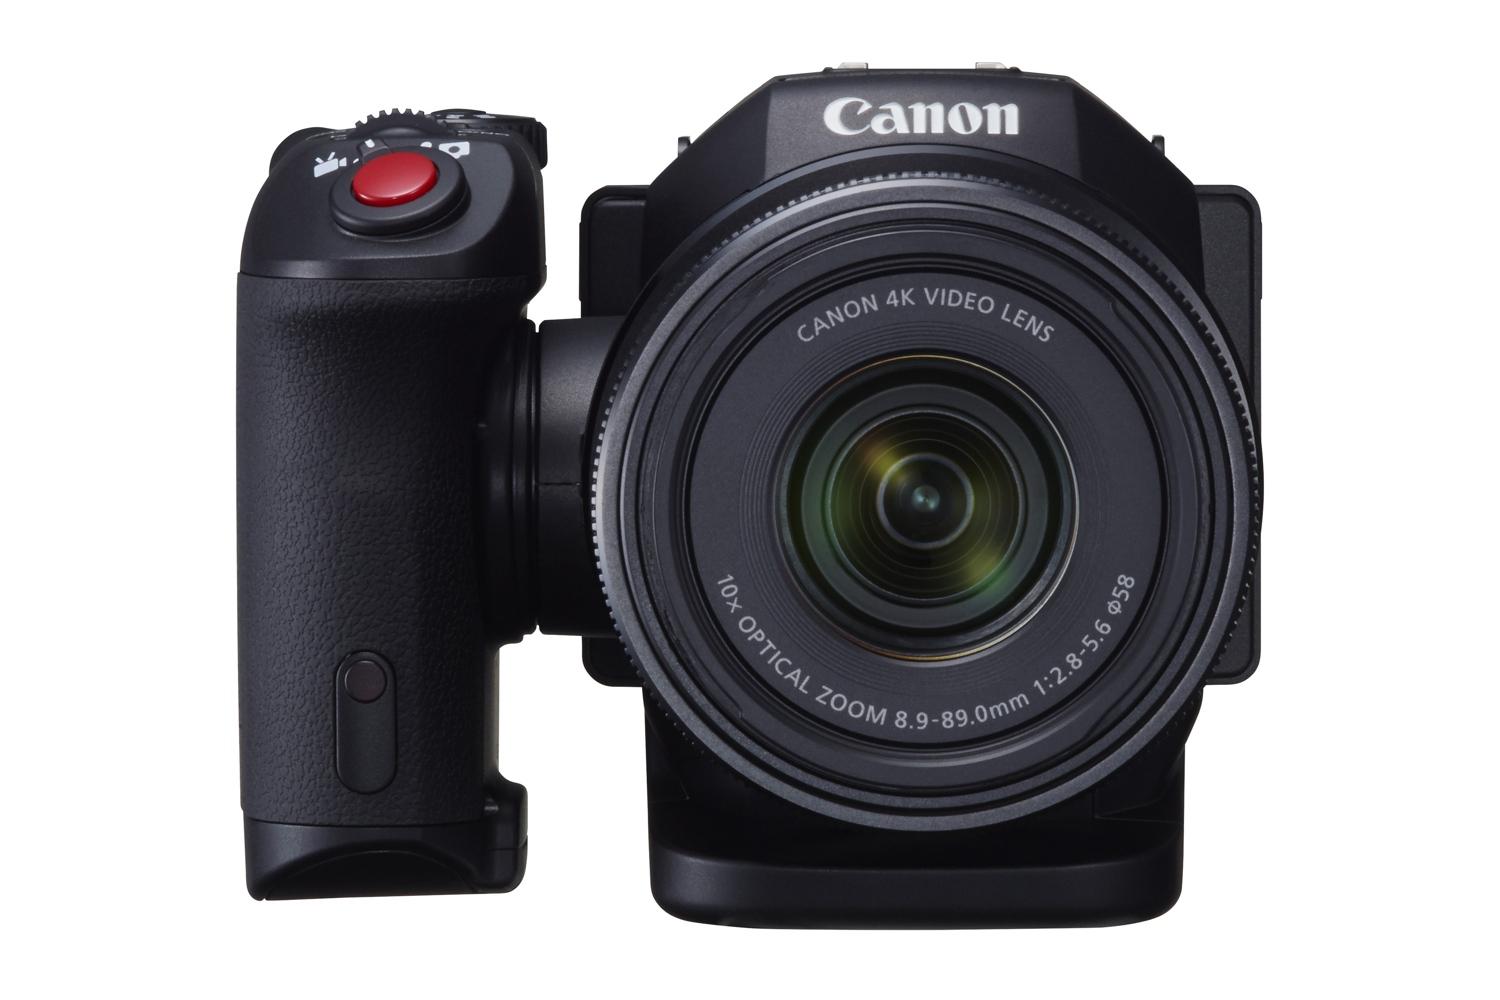 canons new affordable 4k camcorder ideal for budding filmmakers youtube creators canon xc10 6